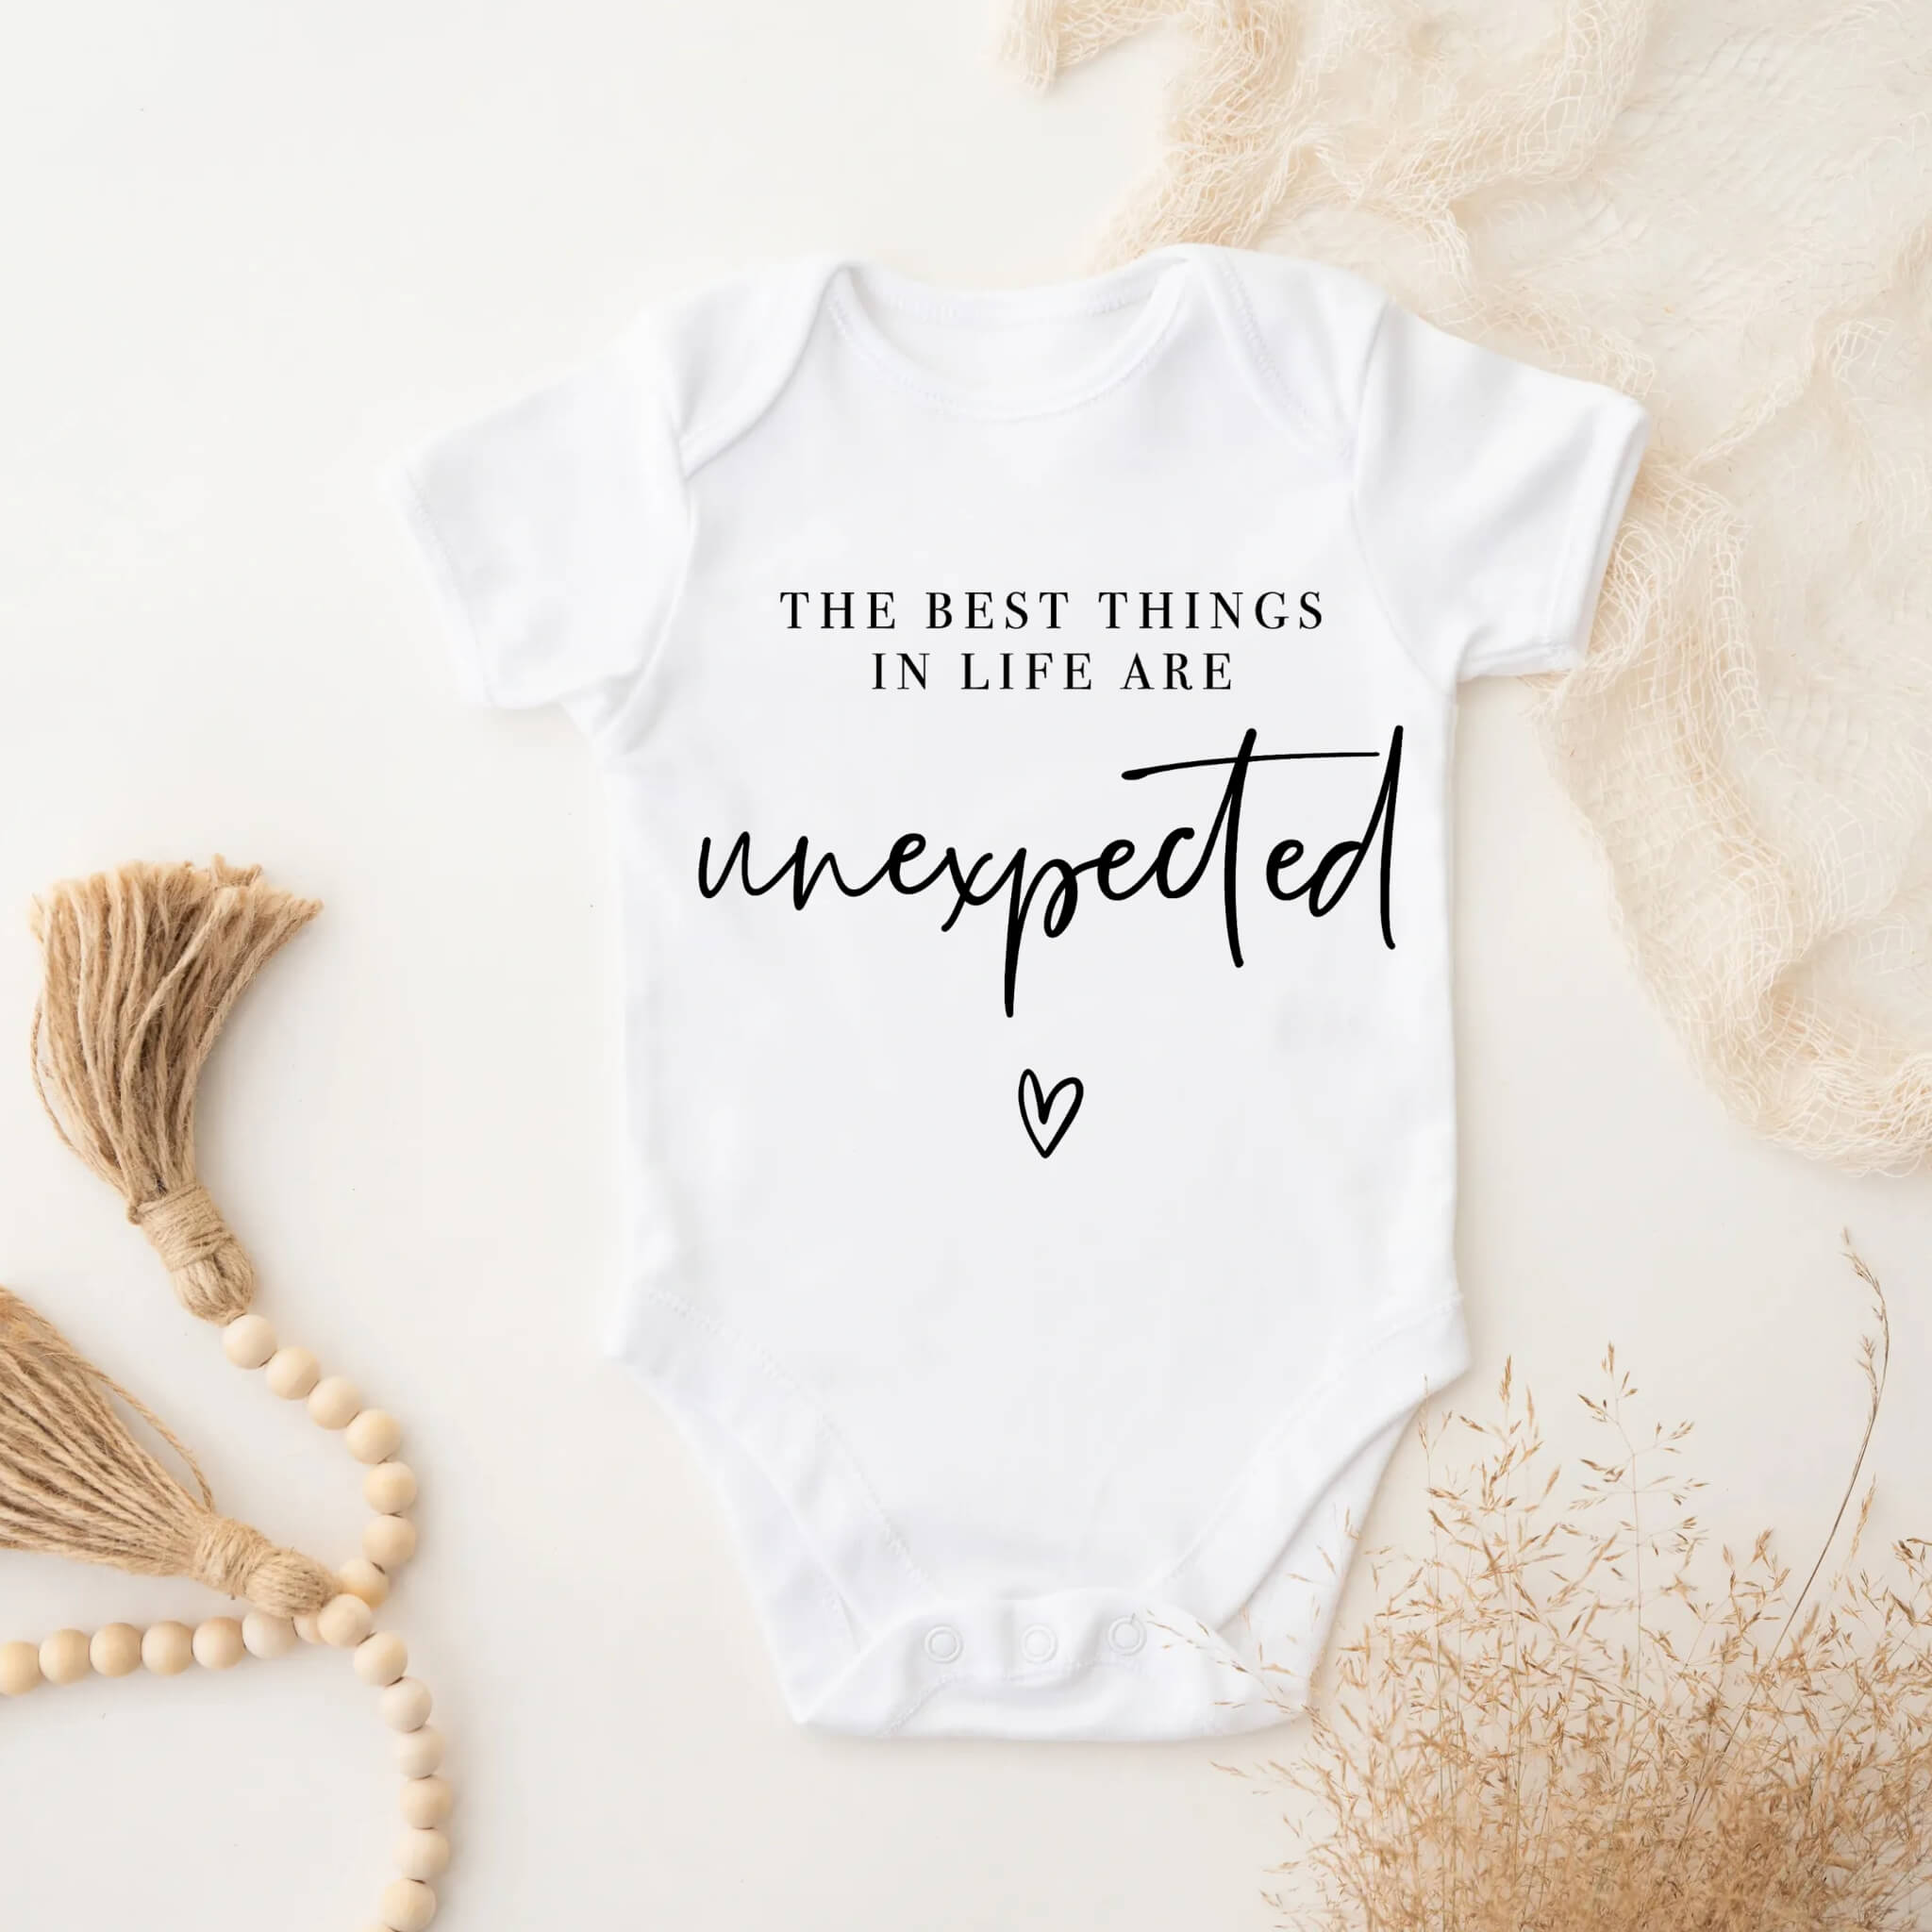 Personalized Pregnancy Announcement, The Best Things In Life Are Unexpected, Dad, Grandma, Grandpa, Auntie, Uncle To Be, Customized Baby Announcement Onesie, Personalized Due Date Gift Box